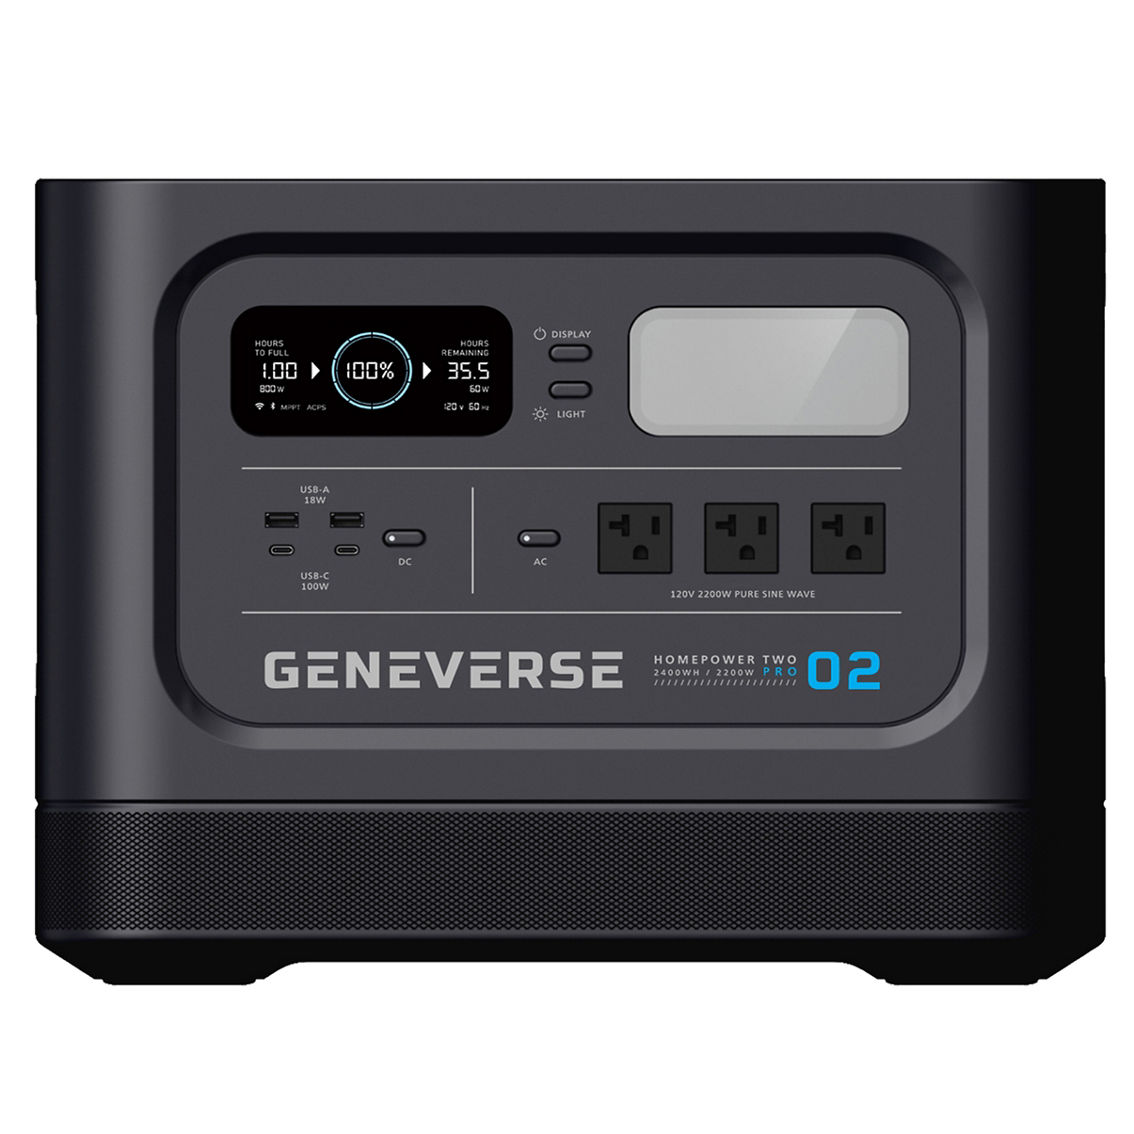 Geneverse HomePower Two Pro Solar Generator - Image 2 of 10